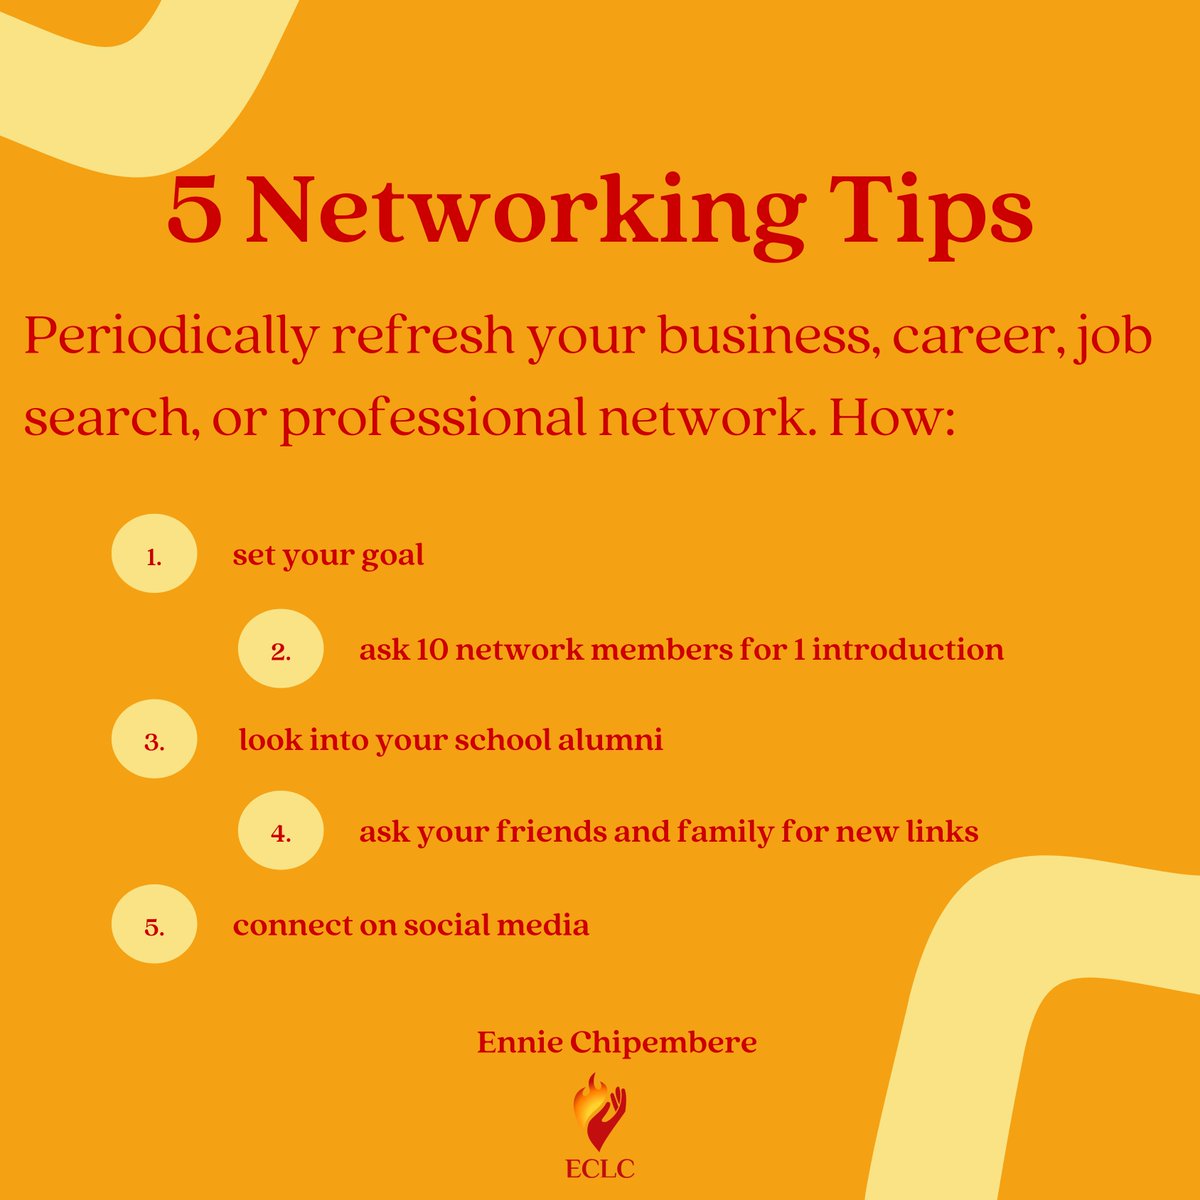 #Networking tips

Periodically refresh your business, career, #jobsearch, or professional network.
- set your goal
- ask 10 network members for 1 introduction
- look into your school alumni
- ask friends and family for new links
- connect on social media

#CoachEnnie #careercoach